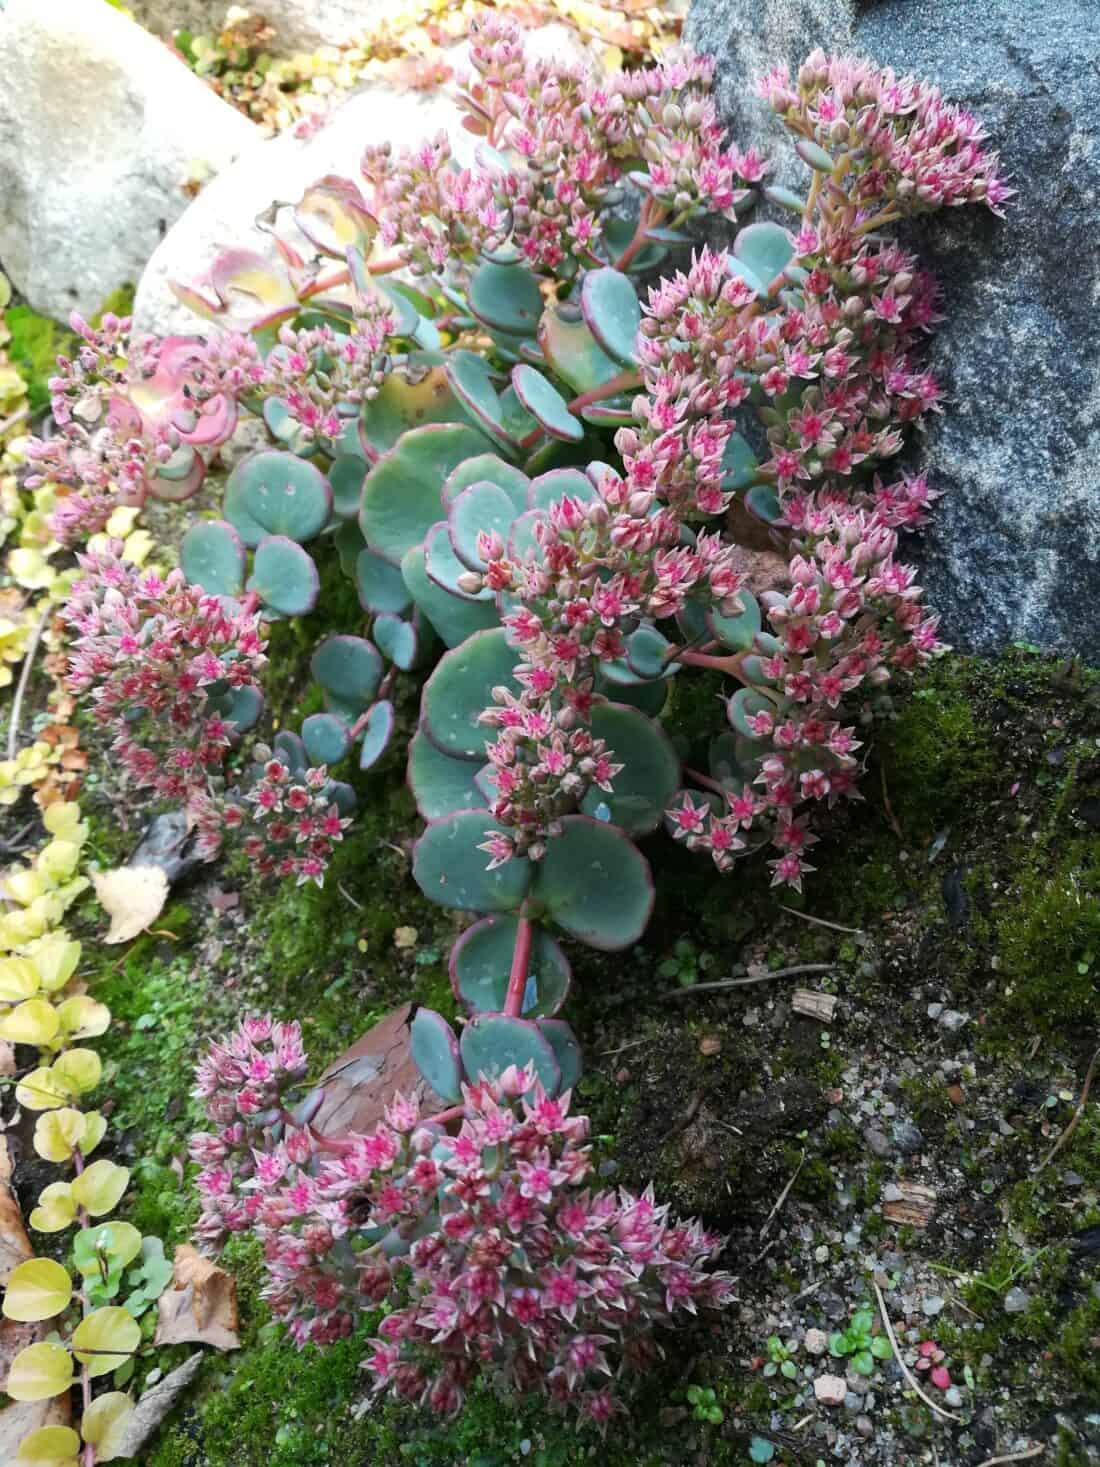 A close-up of a flowering succulent plant with small, pink clusters of flowers. The plant has thick, round green leaves and grows among mossy rocks and gravel in a serene Chartreuse Garden.